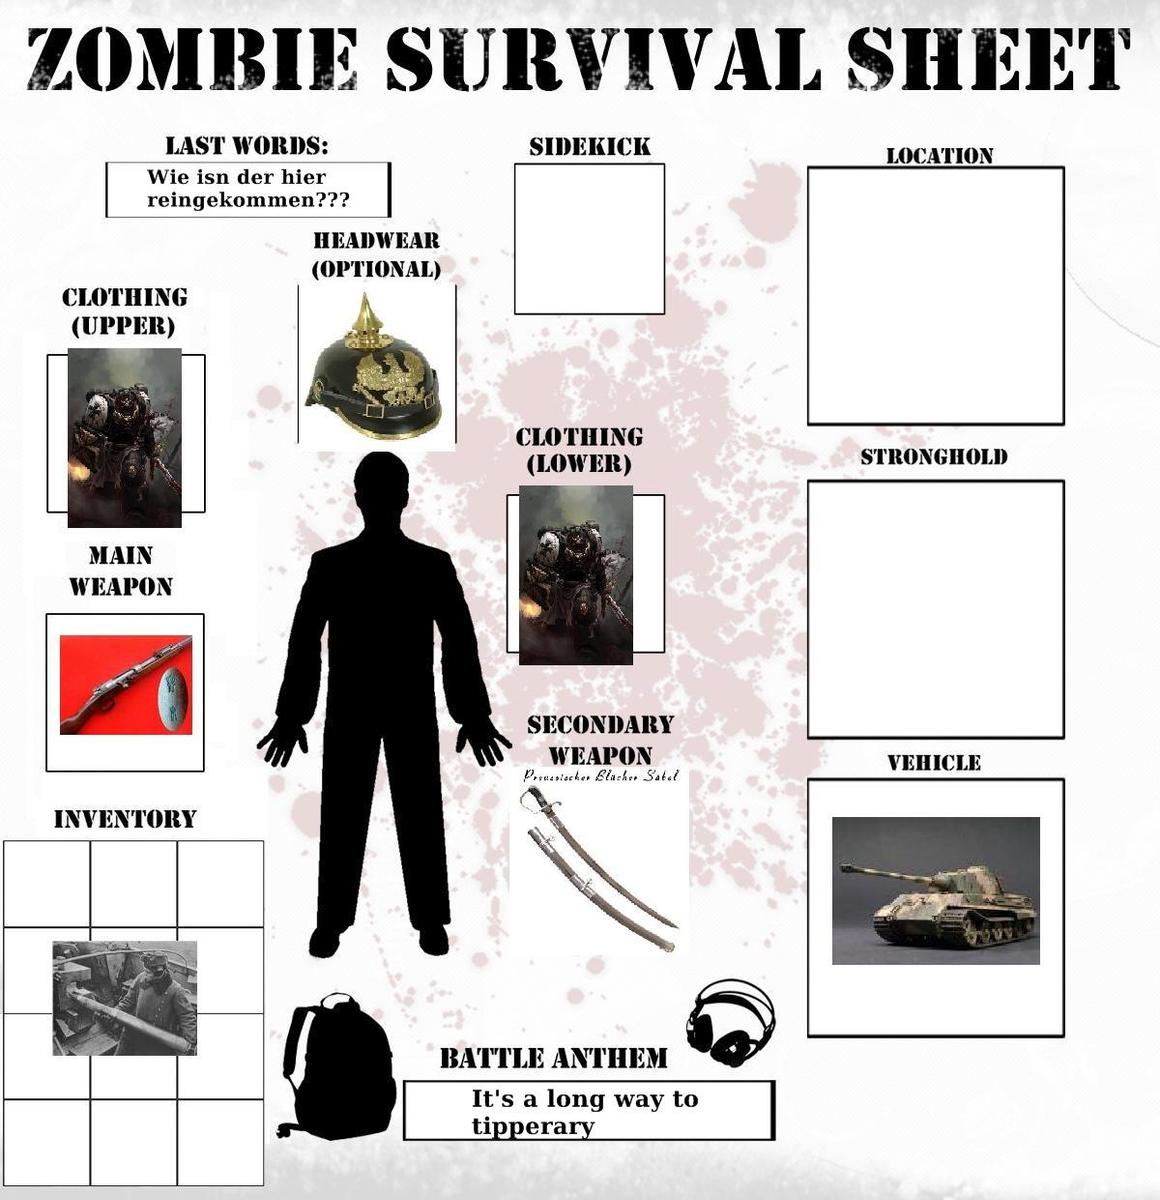 /dateien/uh61294,1268917246,uh612941268911386Zombie Survival Sheet Template by MrAlf